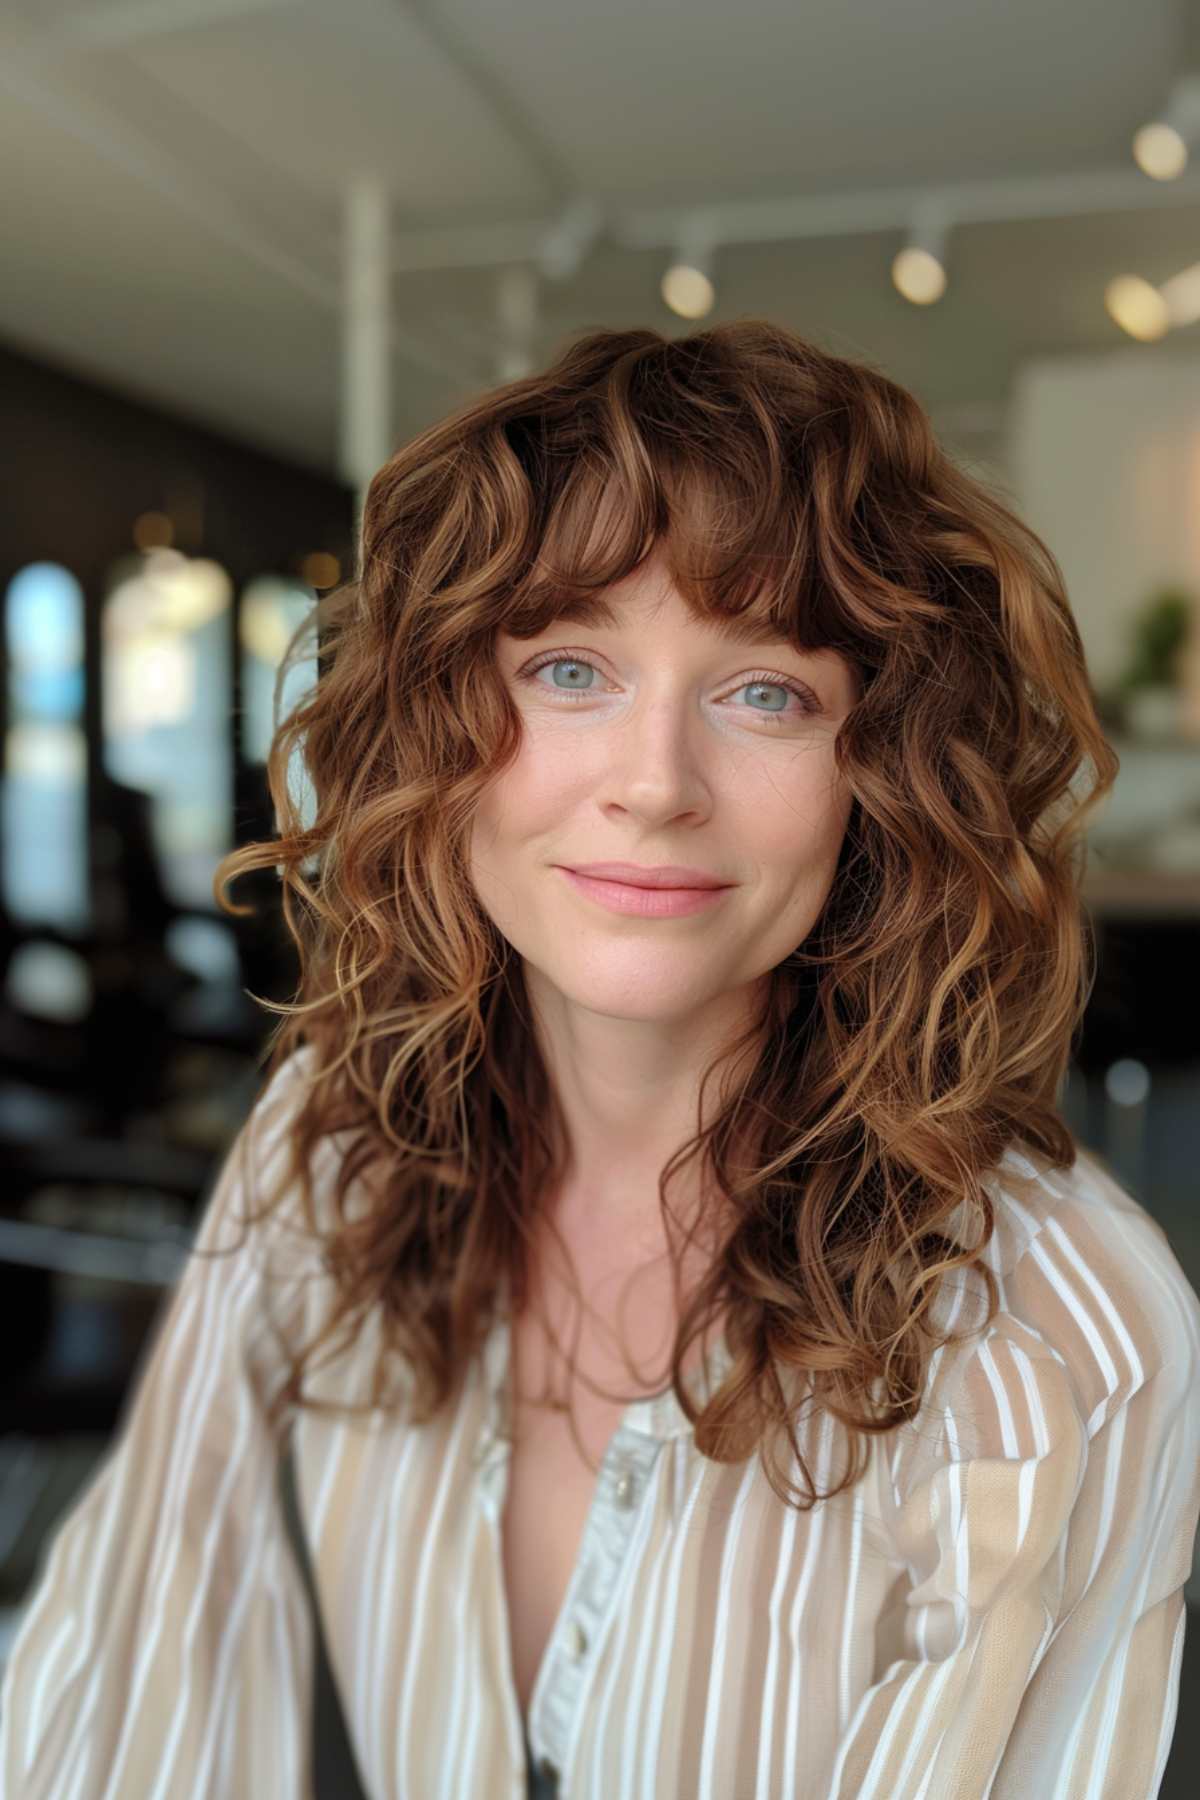 Soft curls with curly bangs on a woman with naturally curly hair.